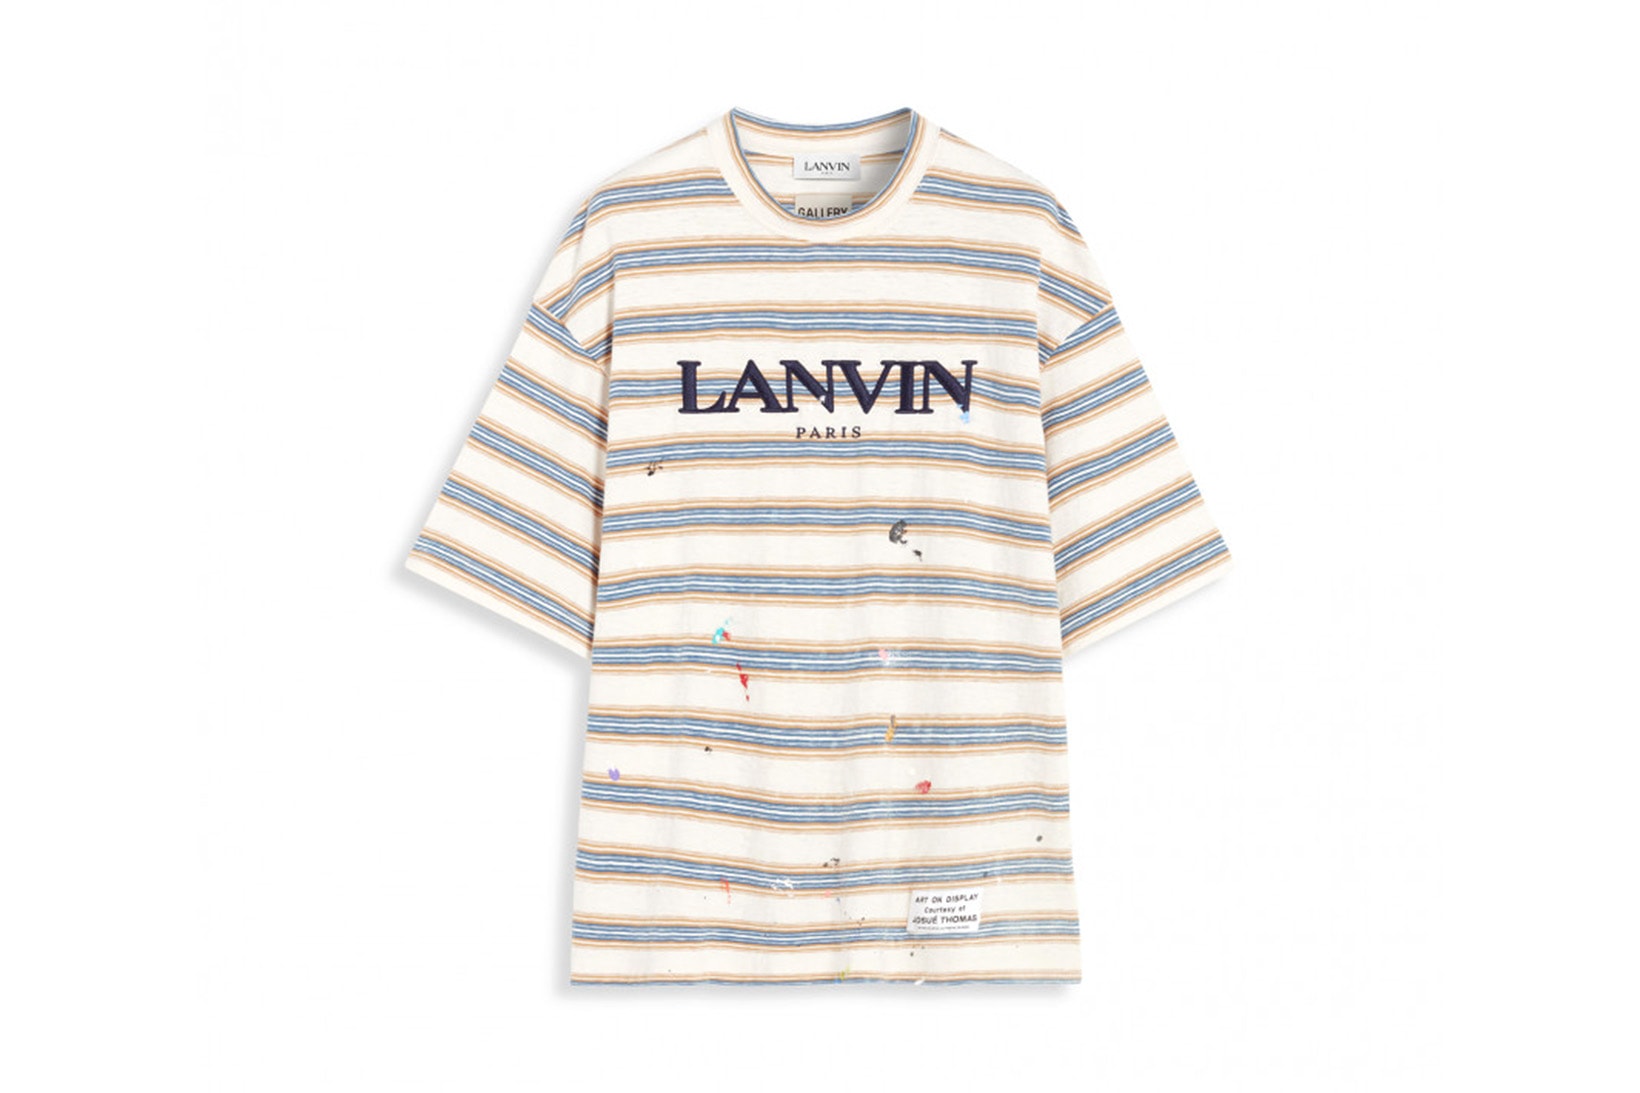 lanvin gallery dept collection hoodies sneakers t-shirts tees release info striped white blue